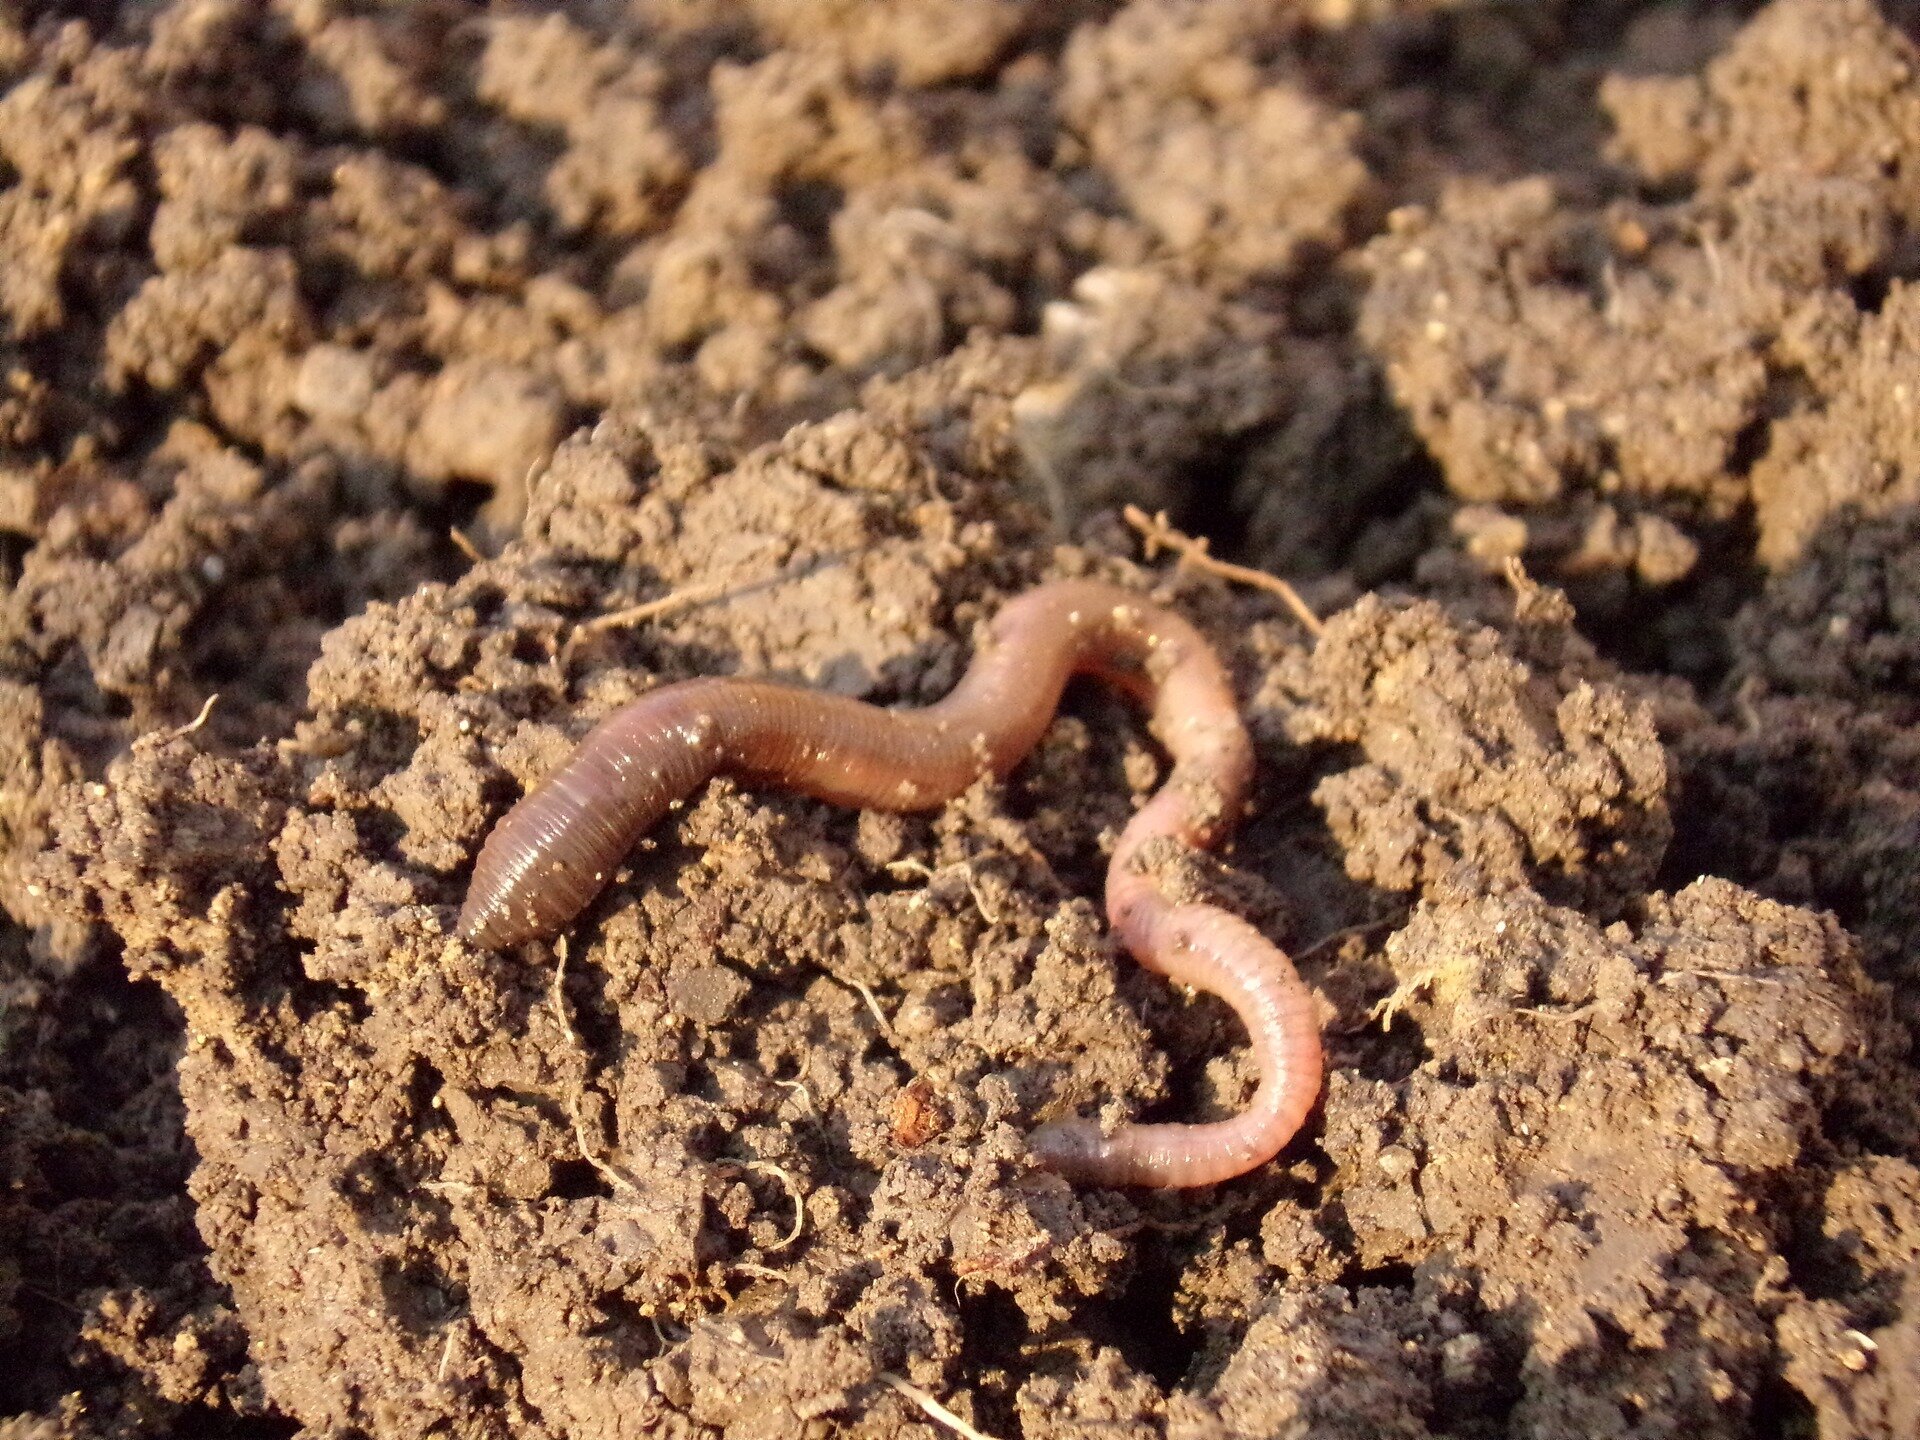 Earthworms contribute to 6.5% of world grain production: study